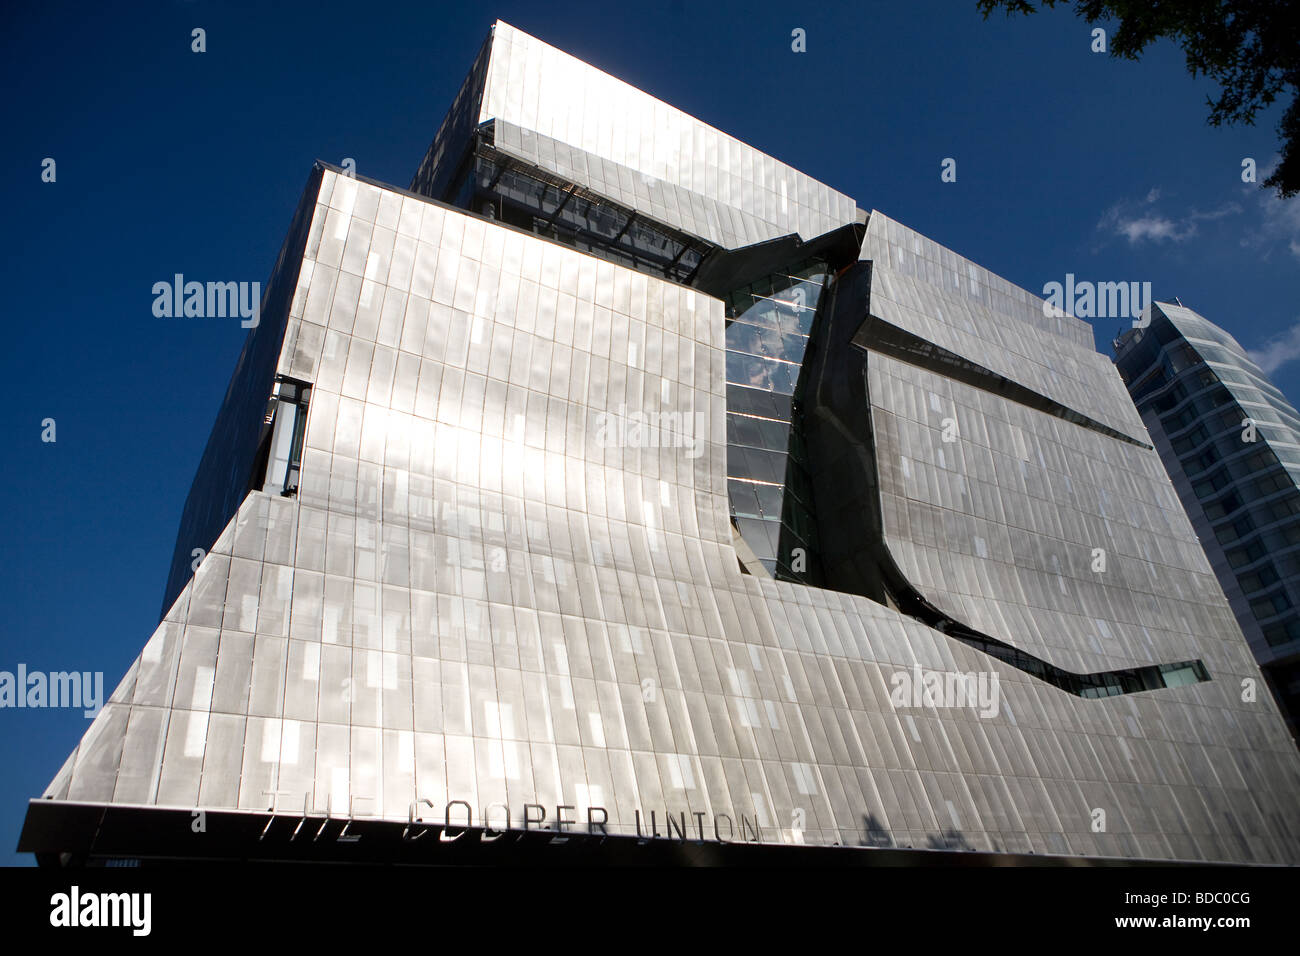 Architectural view of the Cooper Union building designed by Thom Mayne of the Los Angeles firm Morphosis in New York city Stock Photo